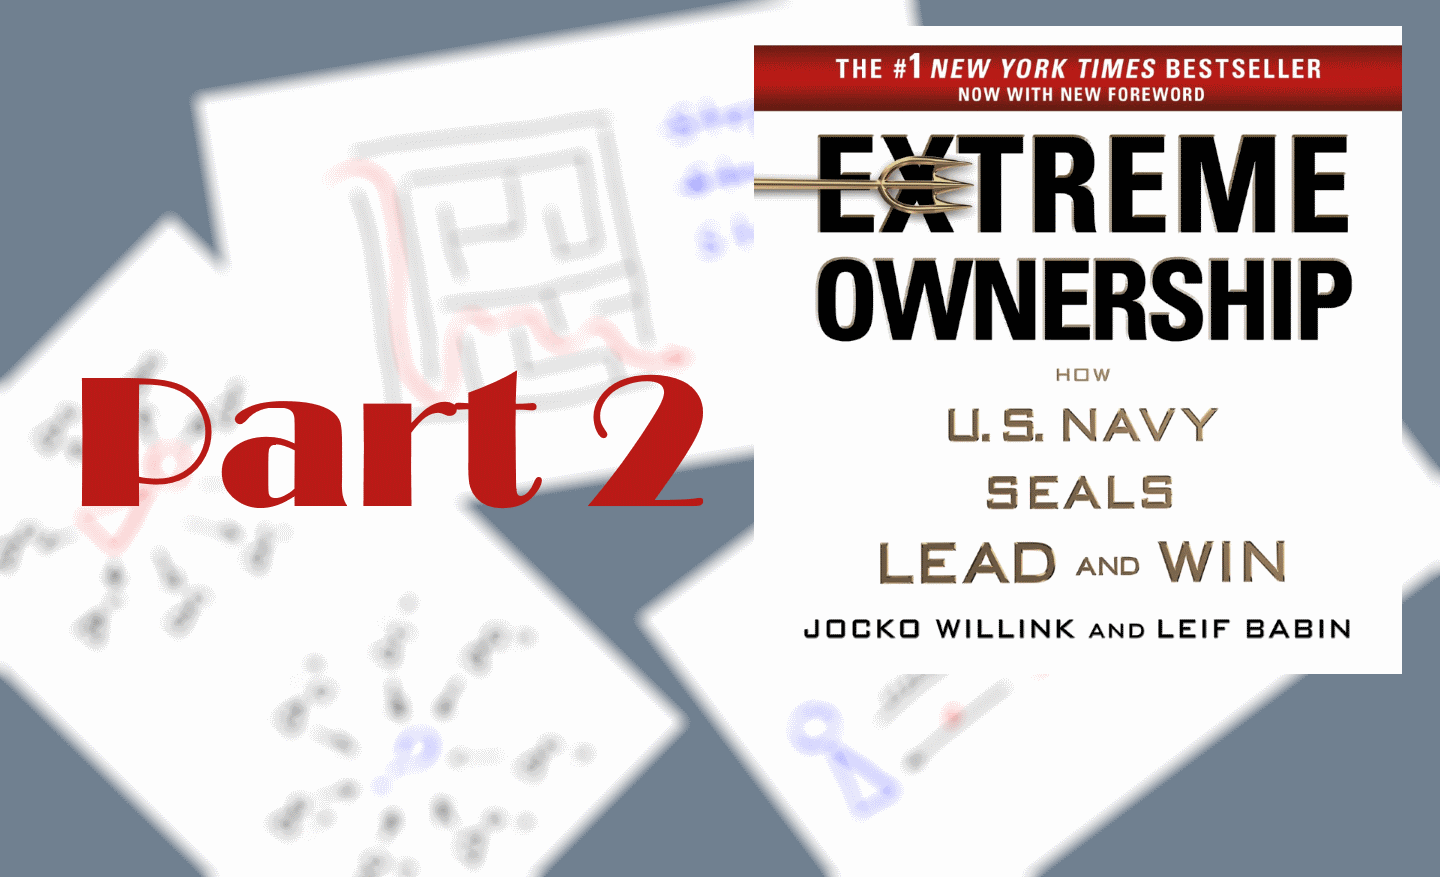 Notes on “Extreme Ownership” by Jocko Willink and Leif Babin (Book Review) - Part 2